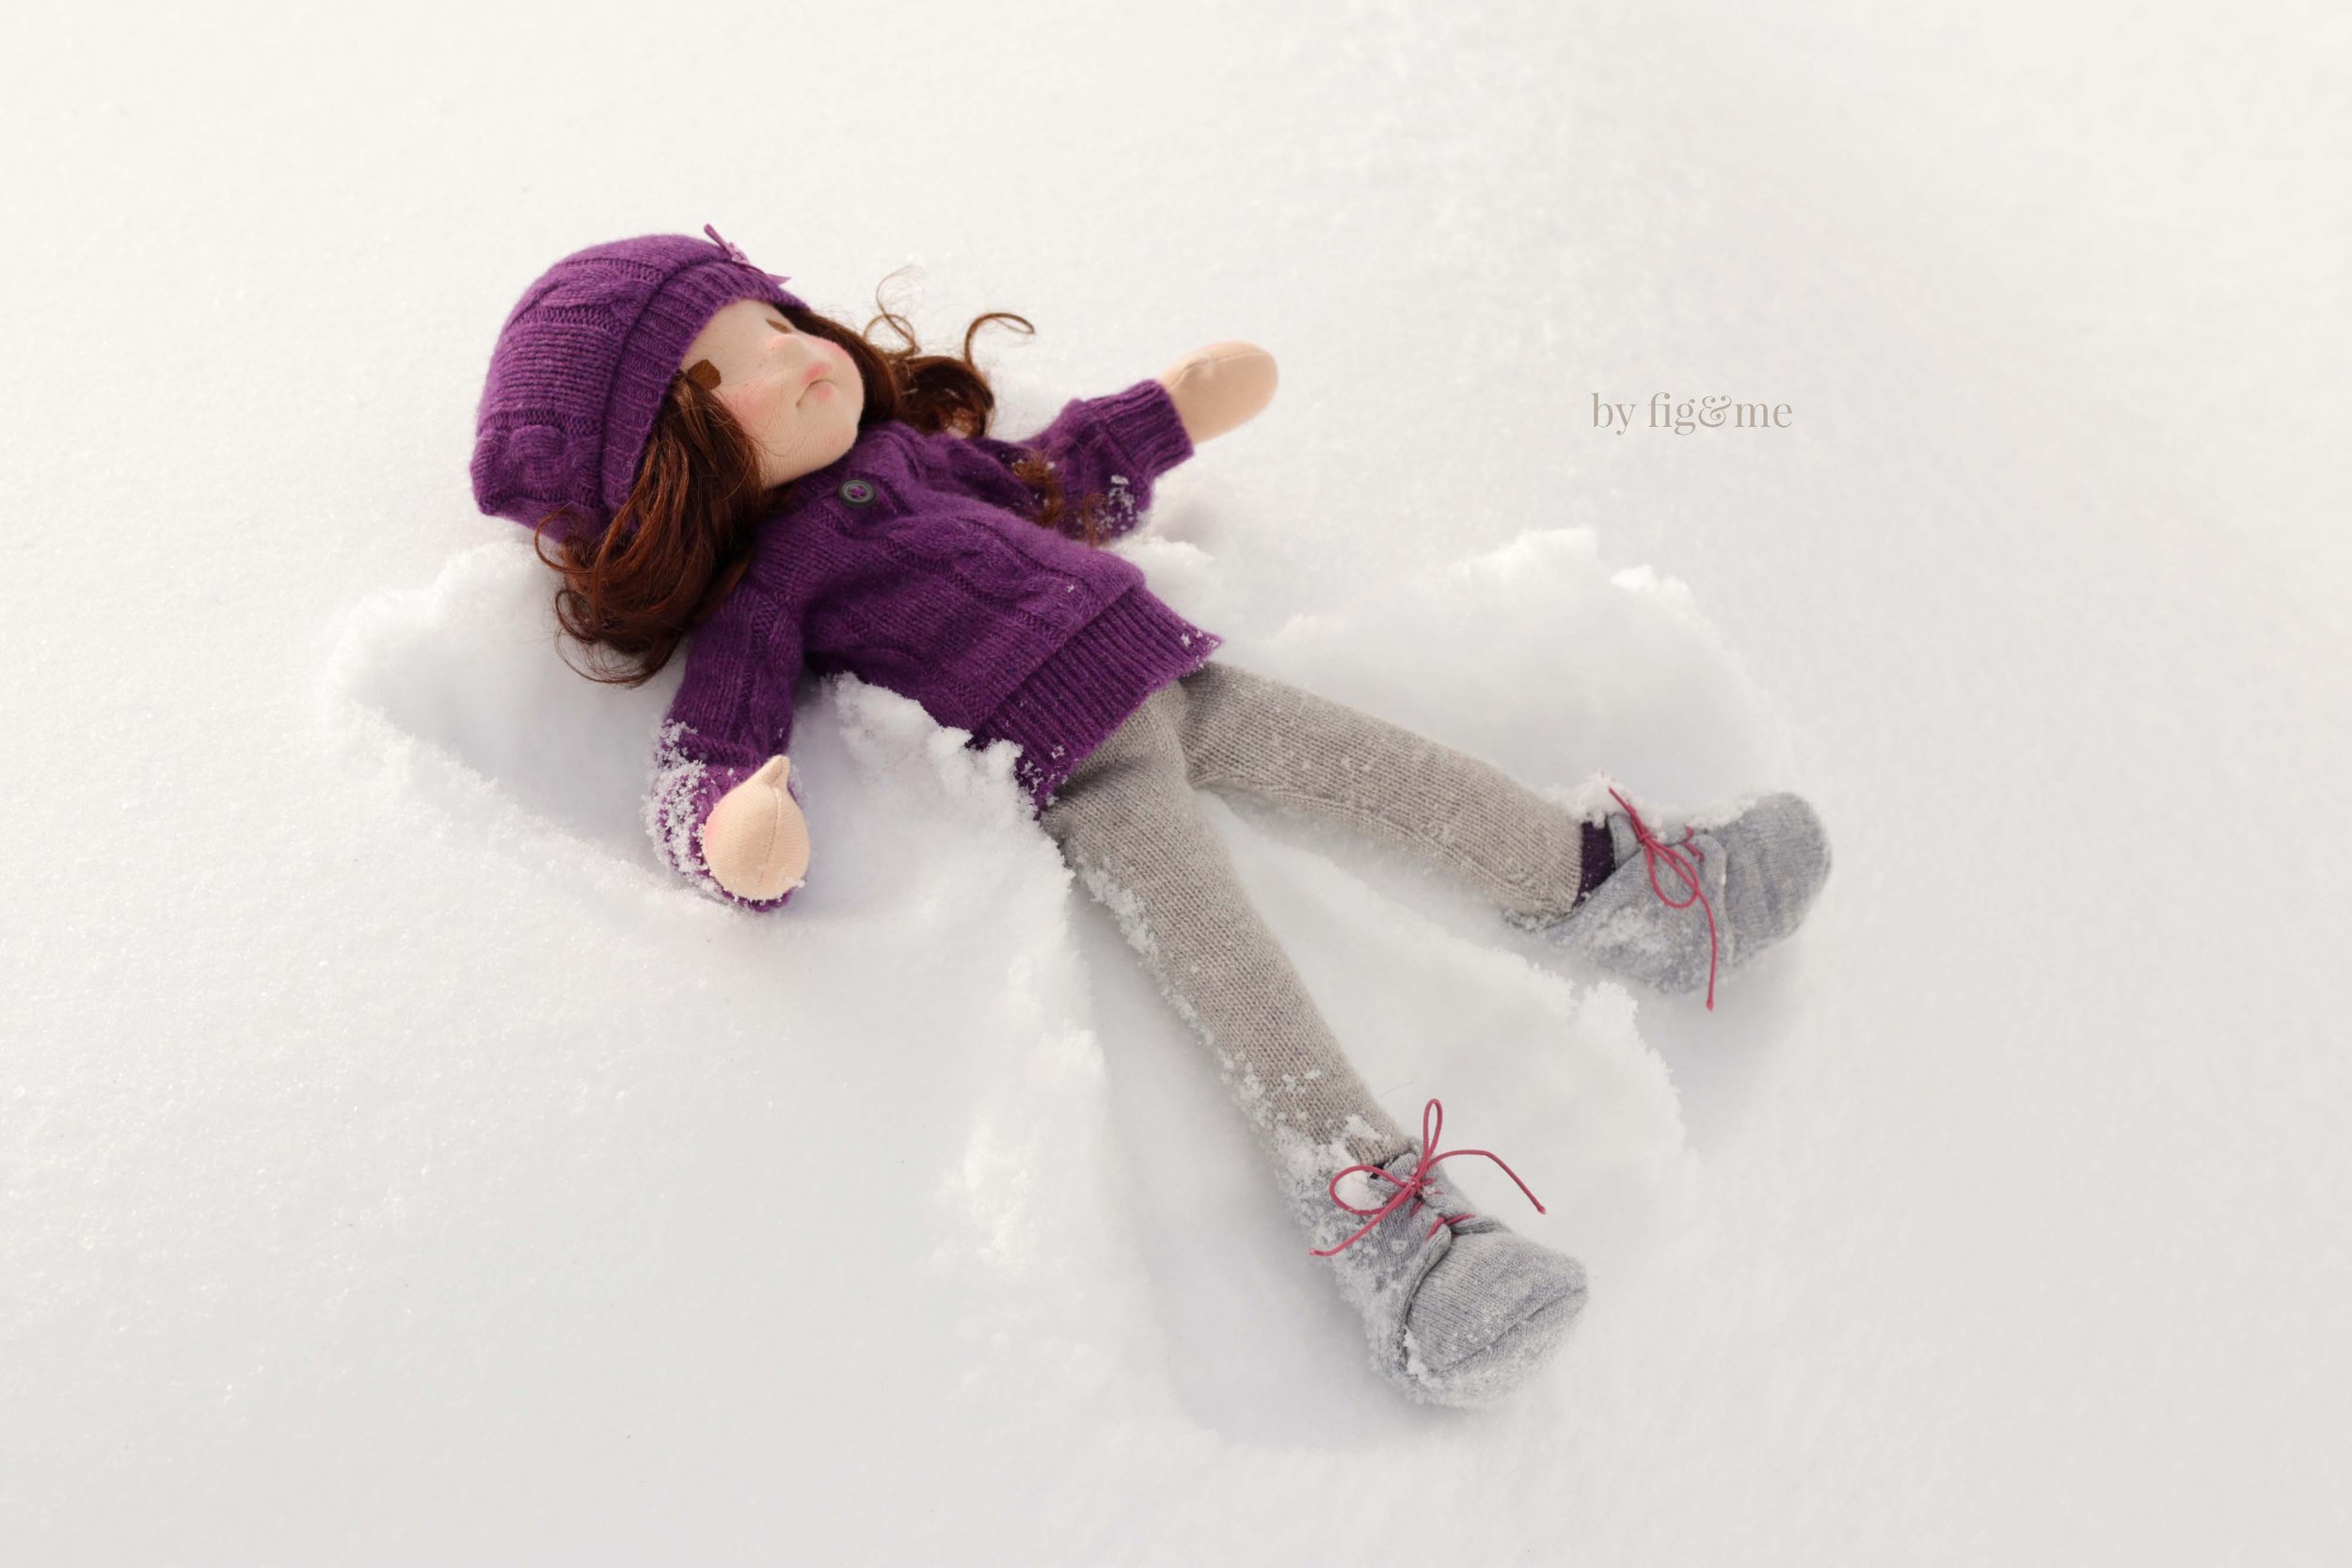 Vivienne Doll Snowman S00 - Art of Living - Sports and Lifestyle